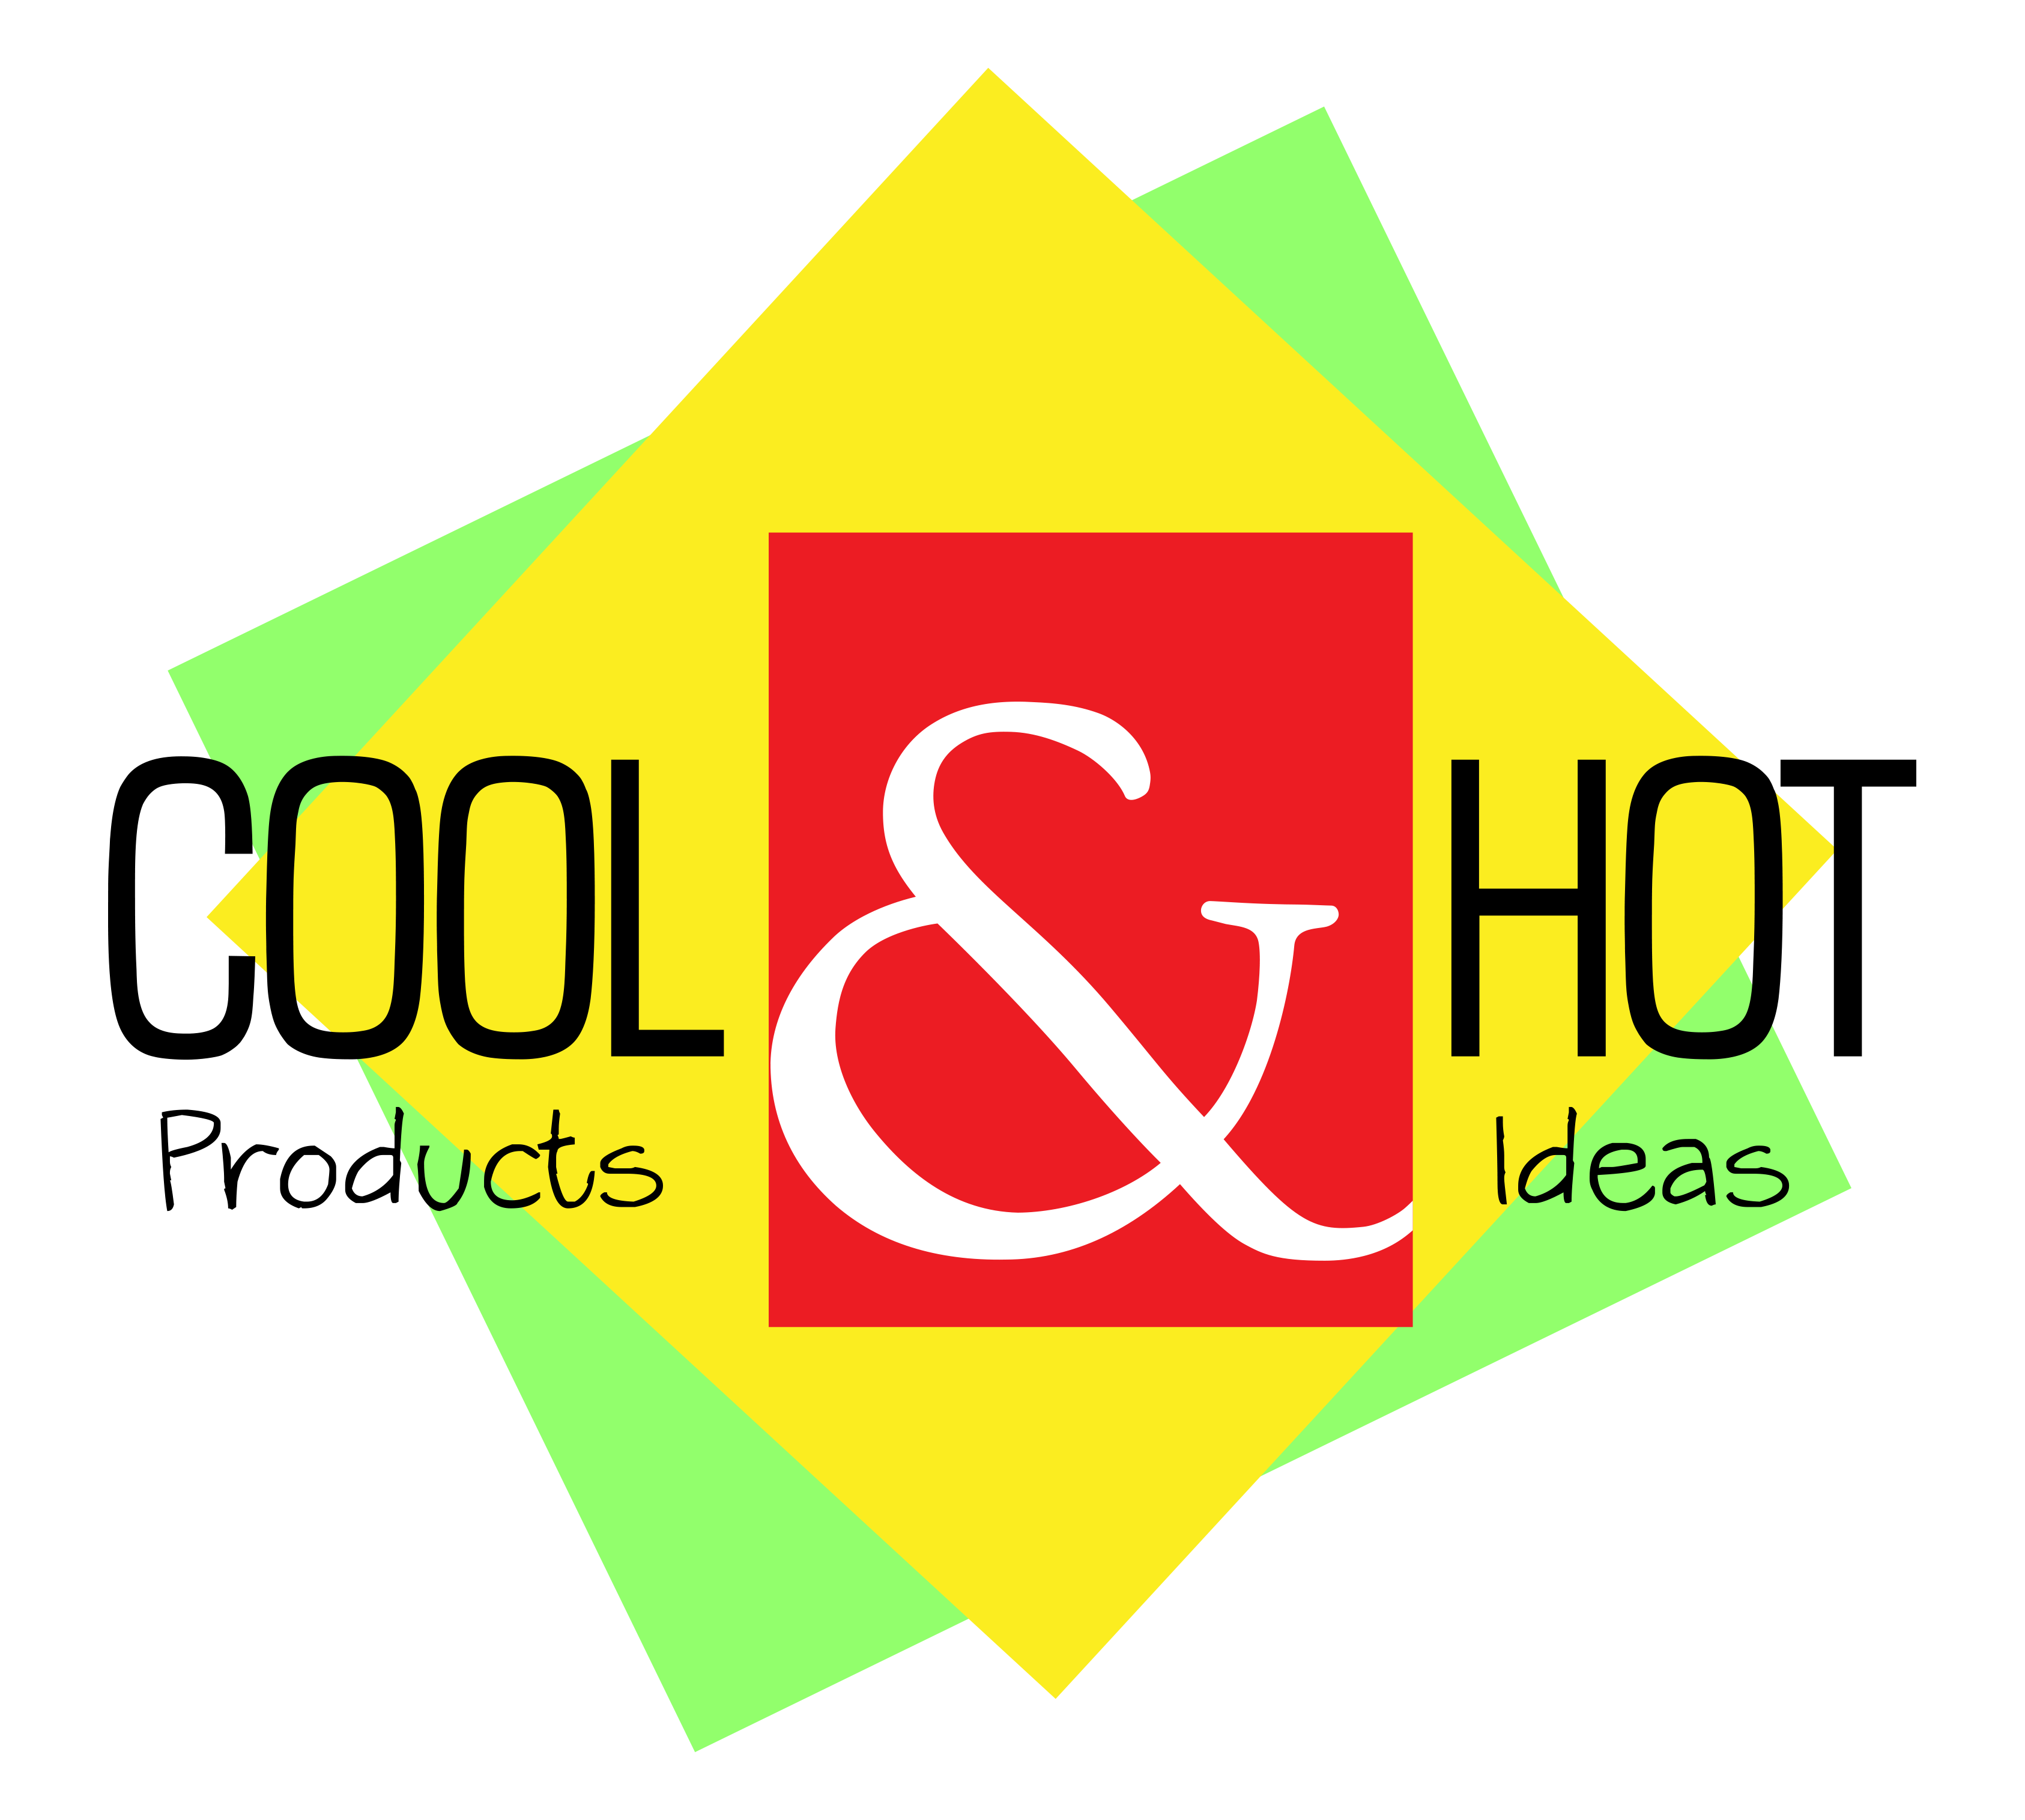 Cool Products and Hot Ideas